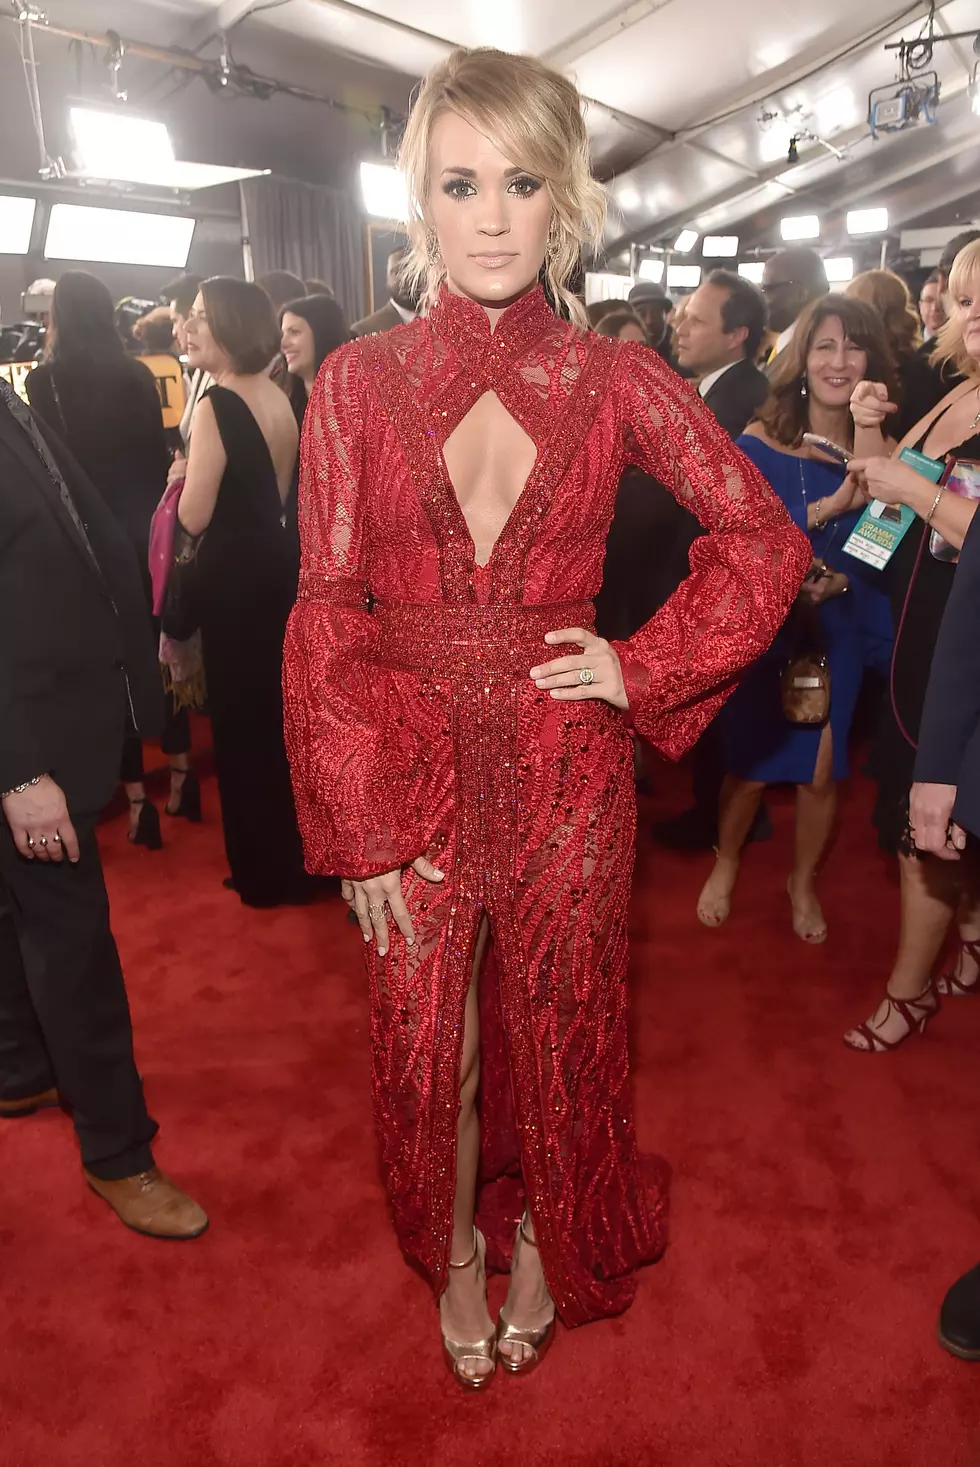 Carrie Underwood Walks the Red Carpet at the 2017 Grammy Awards [PICTURES]